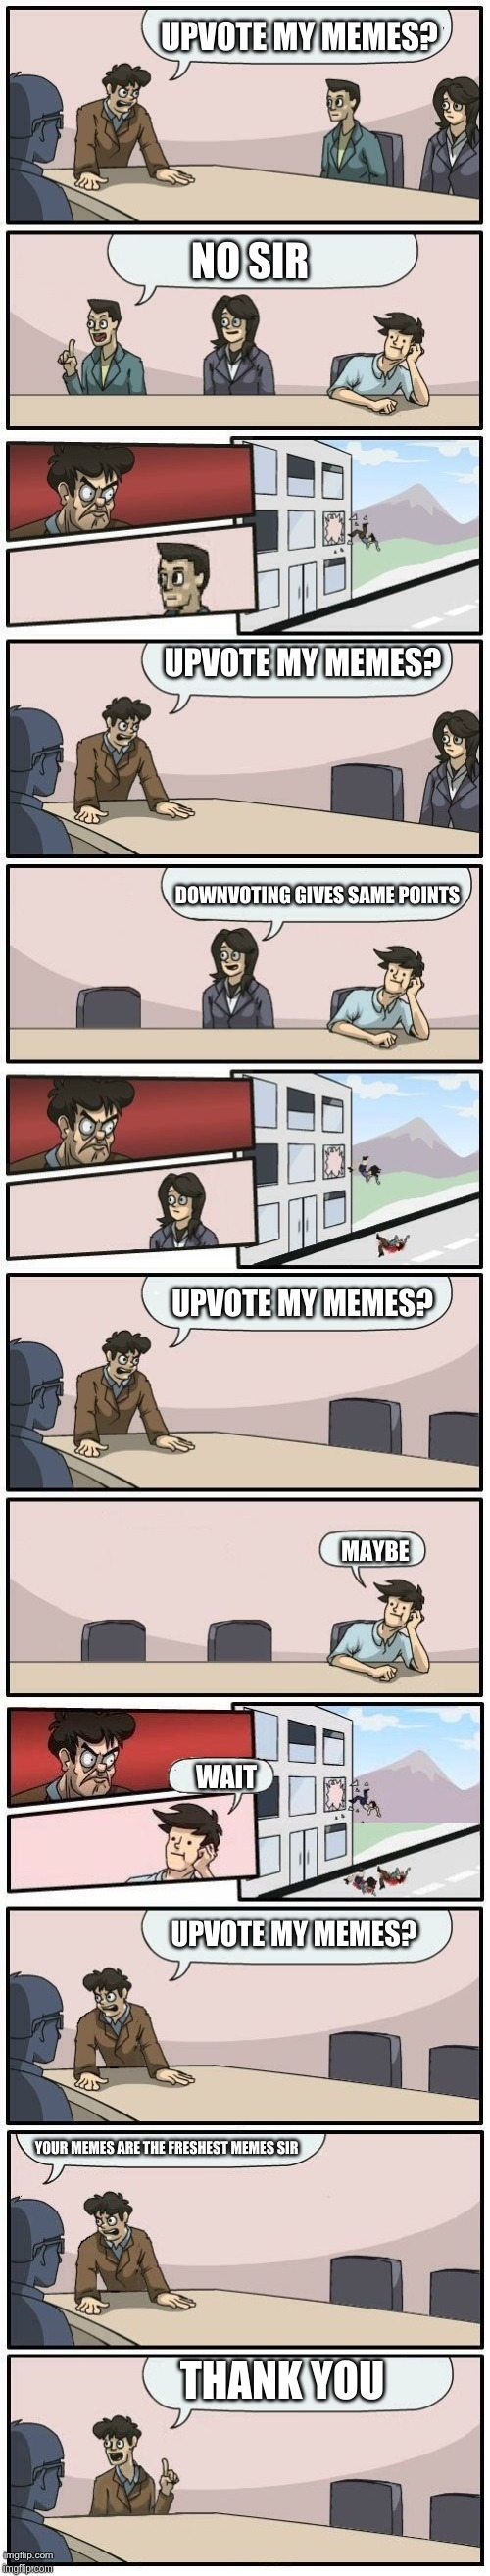 Boardroom Meeting Suggestions Extended | UPVOTE MY MEMES? NO SIR; UPVOTE MY MEMES? DOWNVOTING GIVES SAME POINTS; UPVOTE MY MEMES? MAYBE; WAIT; UPVOTE MY MEMES? YOUR MEMES ARE THE FRESHEST MEMES SIR; THANK YOU | image tagged in boardroom meeting suggestions extended | made w/ Imgflip meme maker